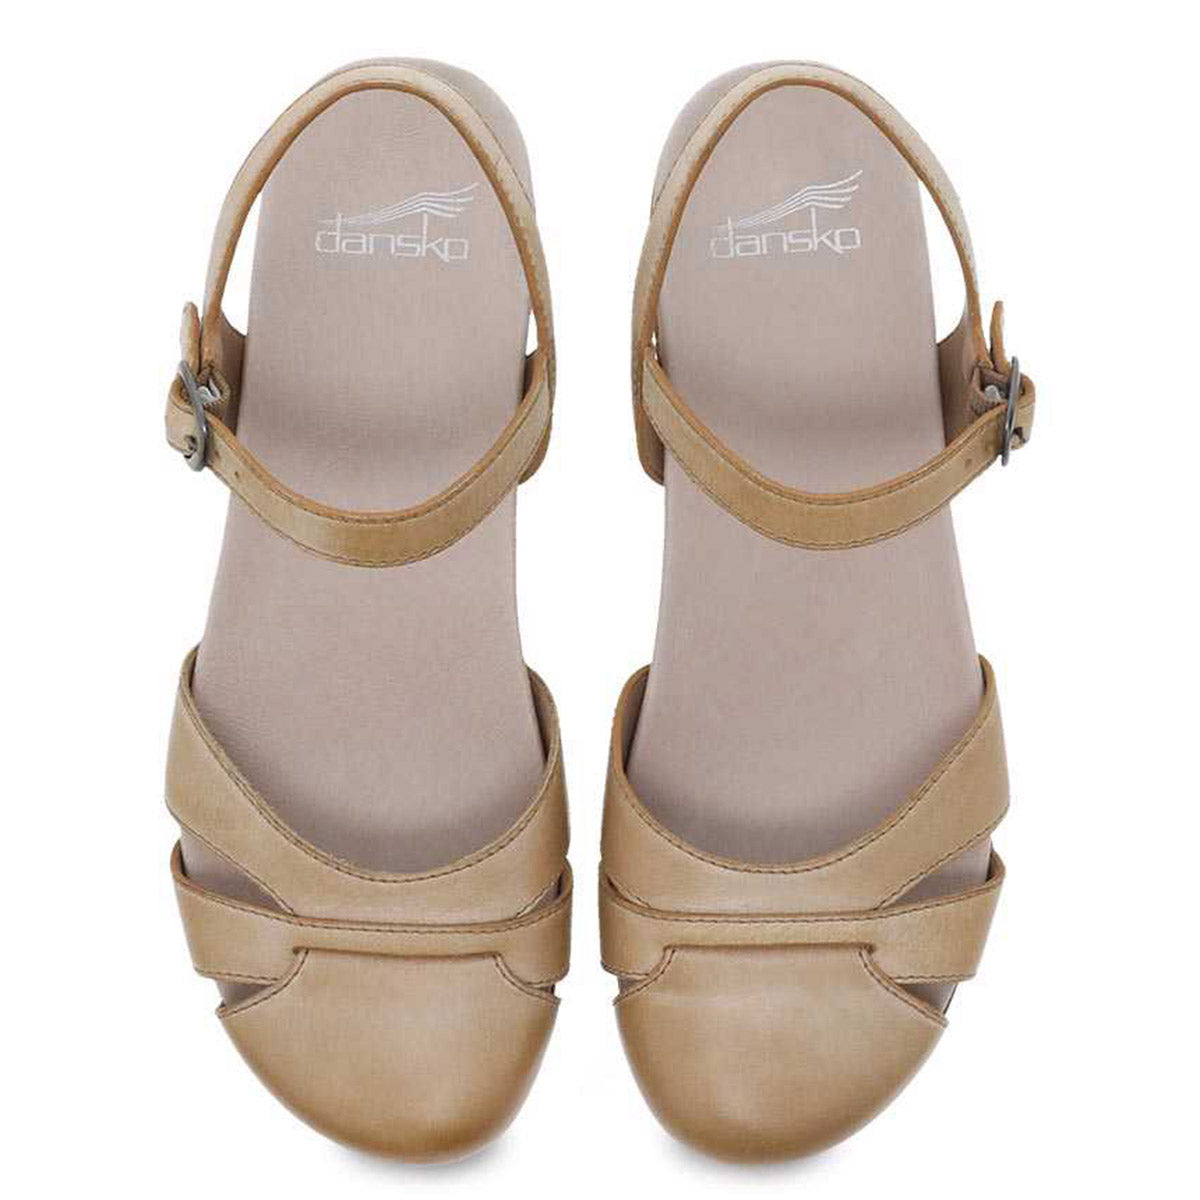 A pair of beige Dansko Betsey Tan Milled Burnished clogs with memory foam cushioning, displayed against a white background.